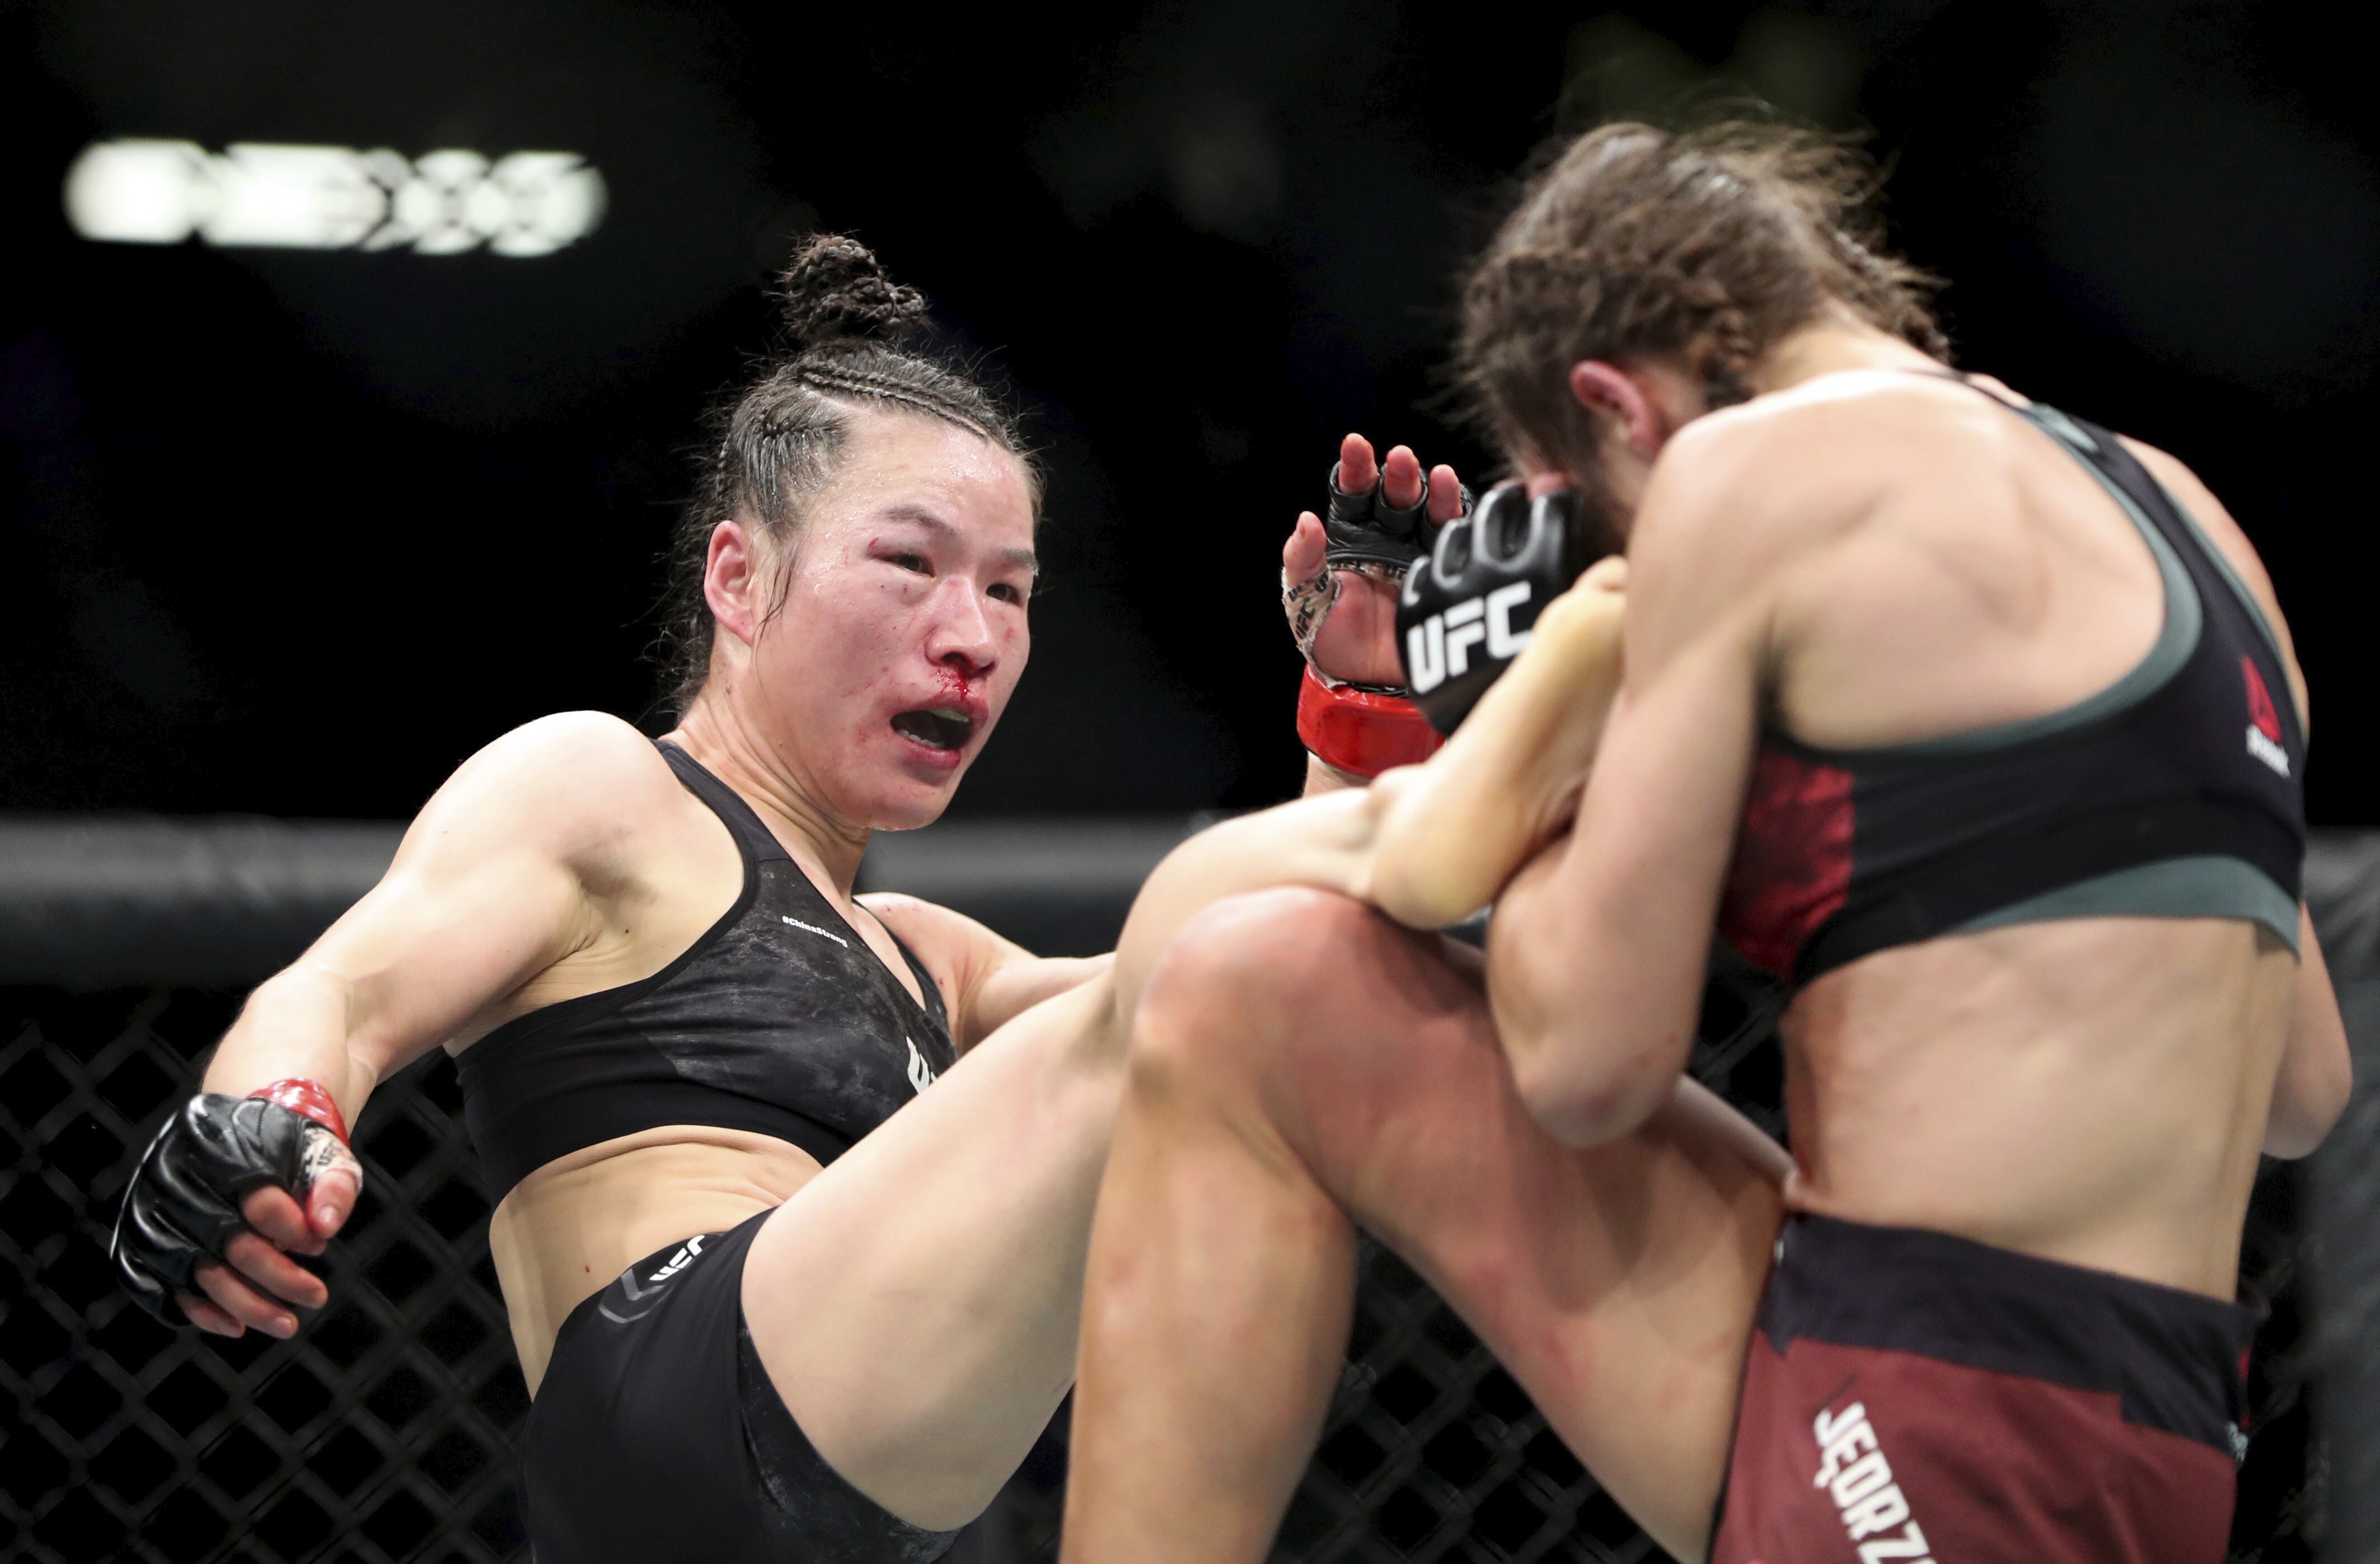 UFC champ Zhang Weili battles gender bias in online discussion South China Morning Post